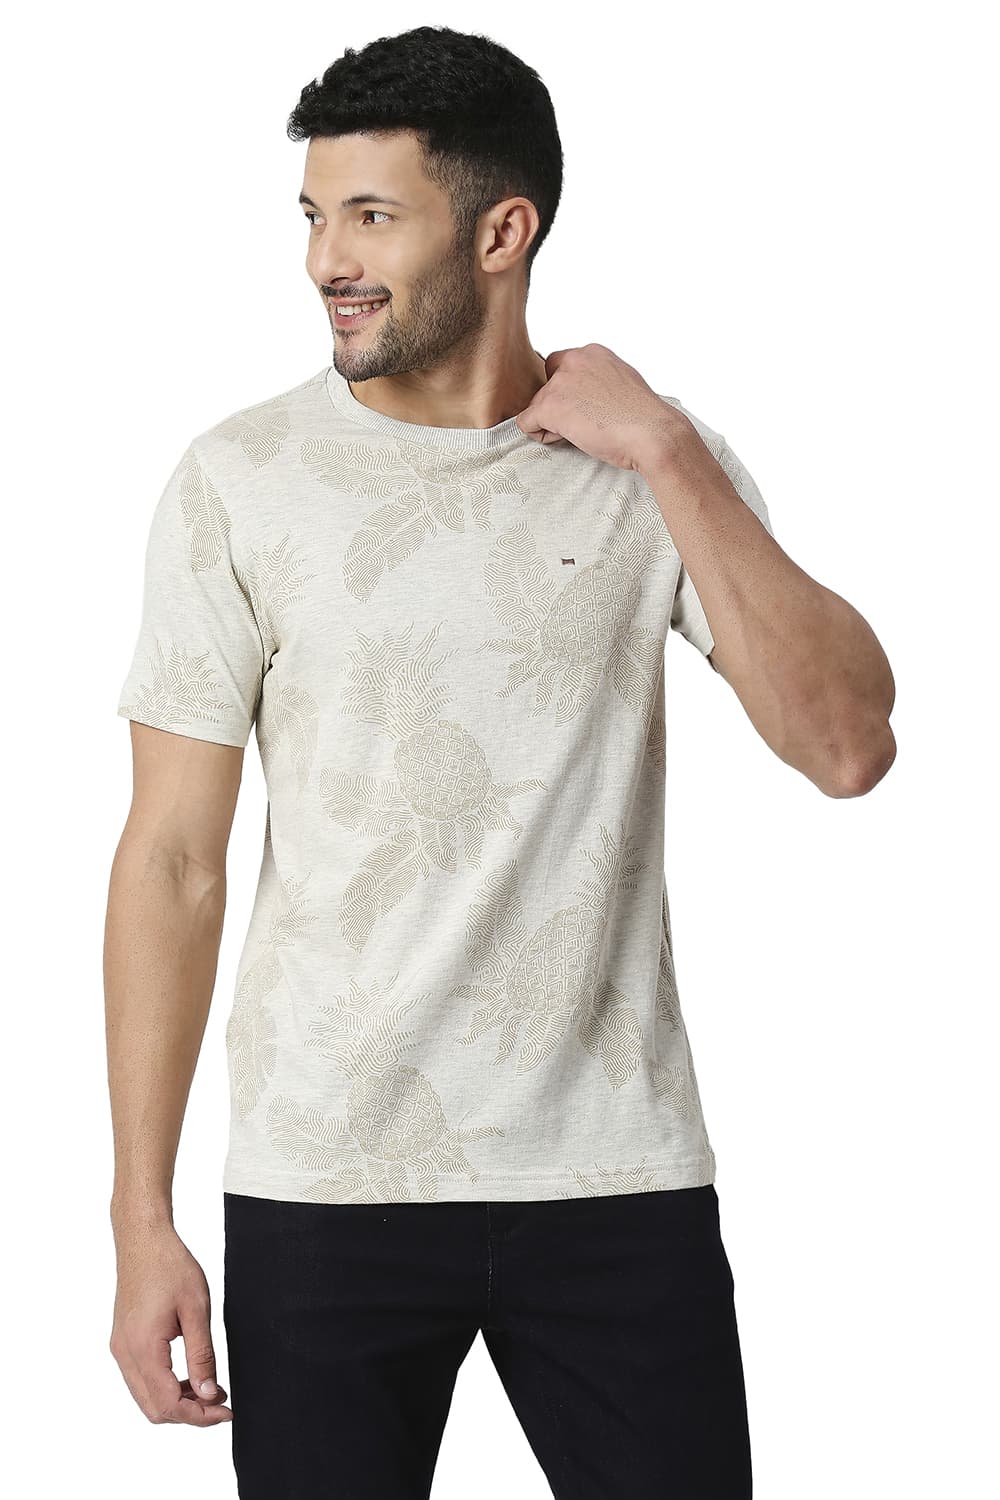 BASICS MUSCLE FIT COTTON POLYESTER CREW T-SHIRT